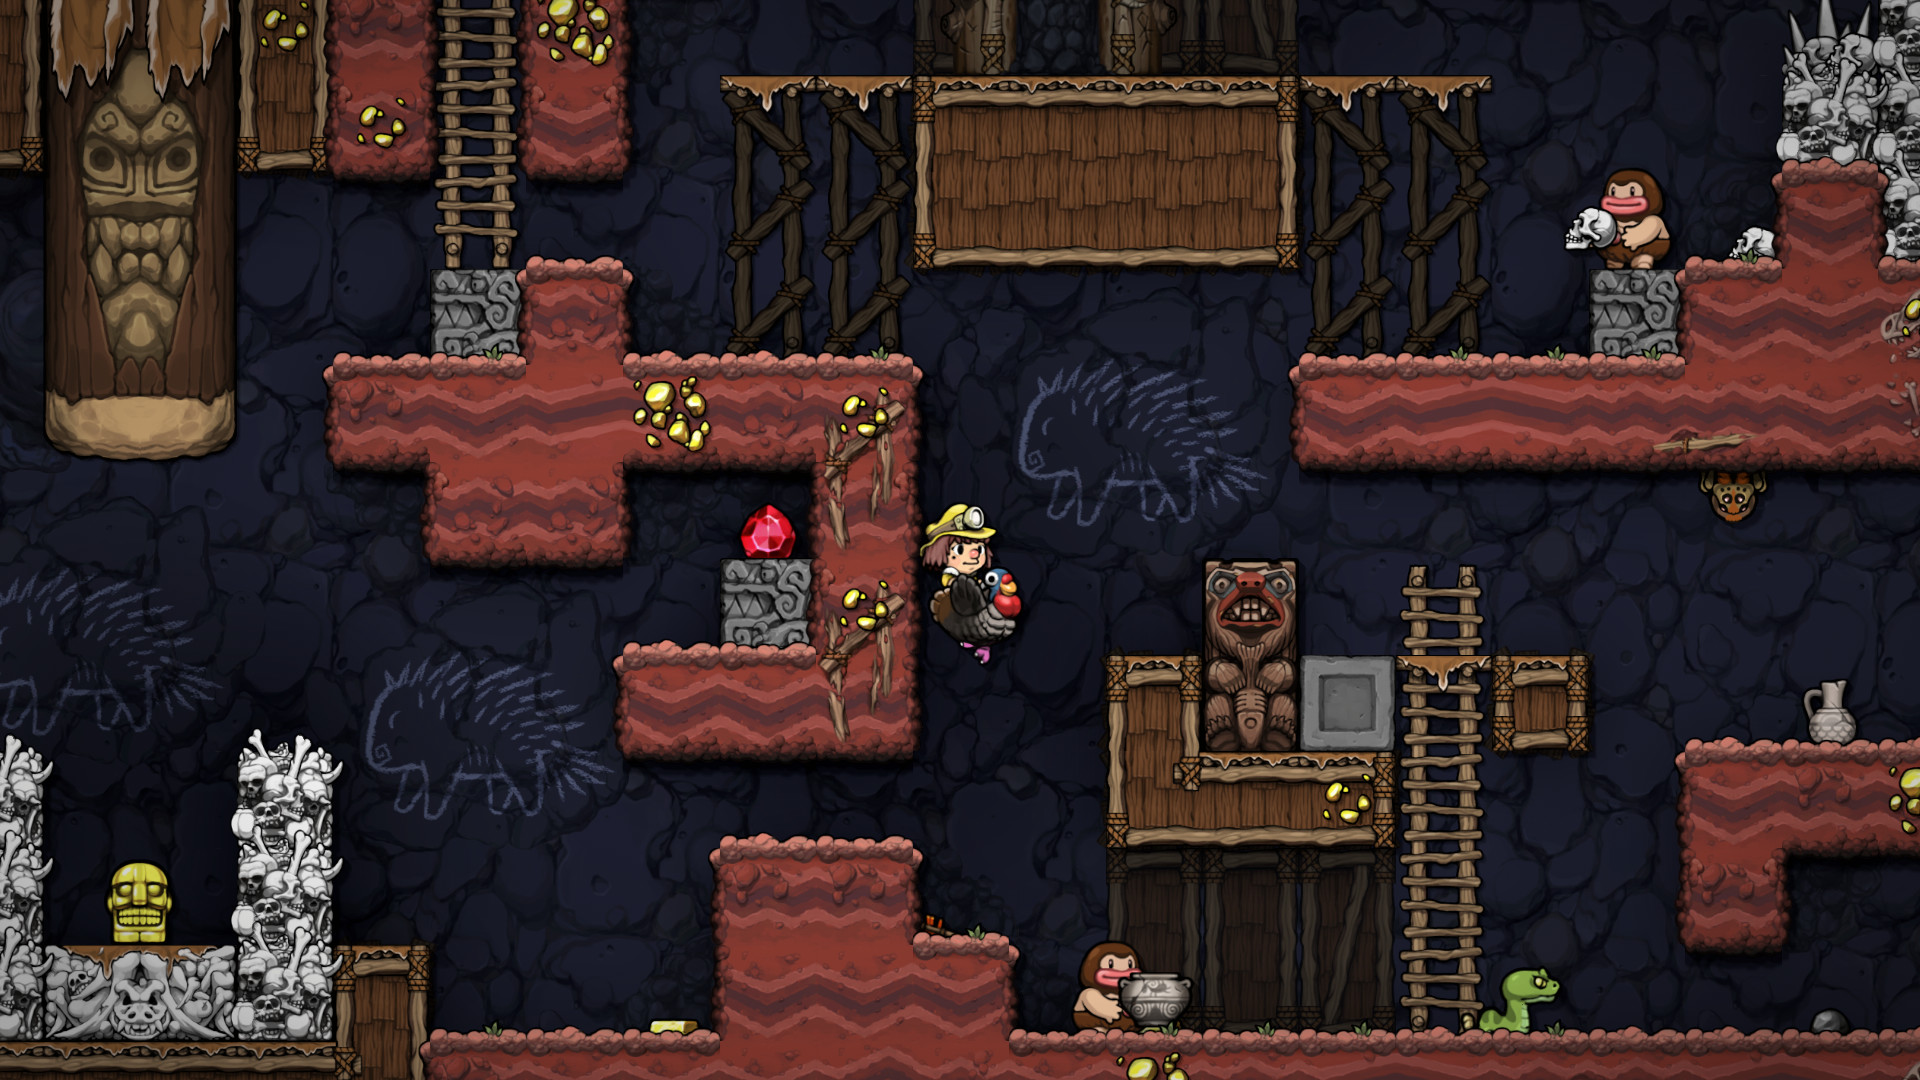 Spelunky 2 will come to Steam “shortly after” its PlayStation launch